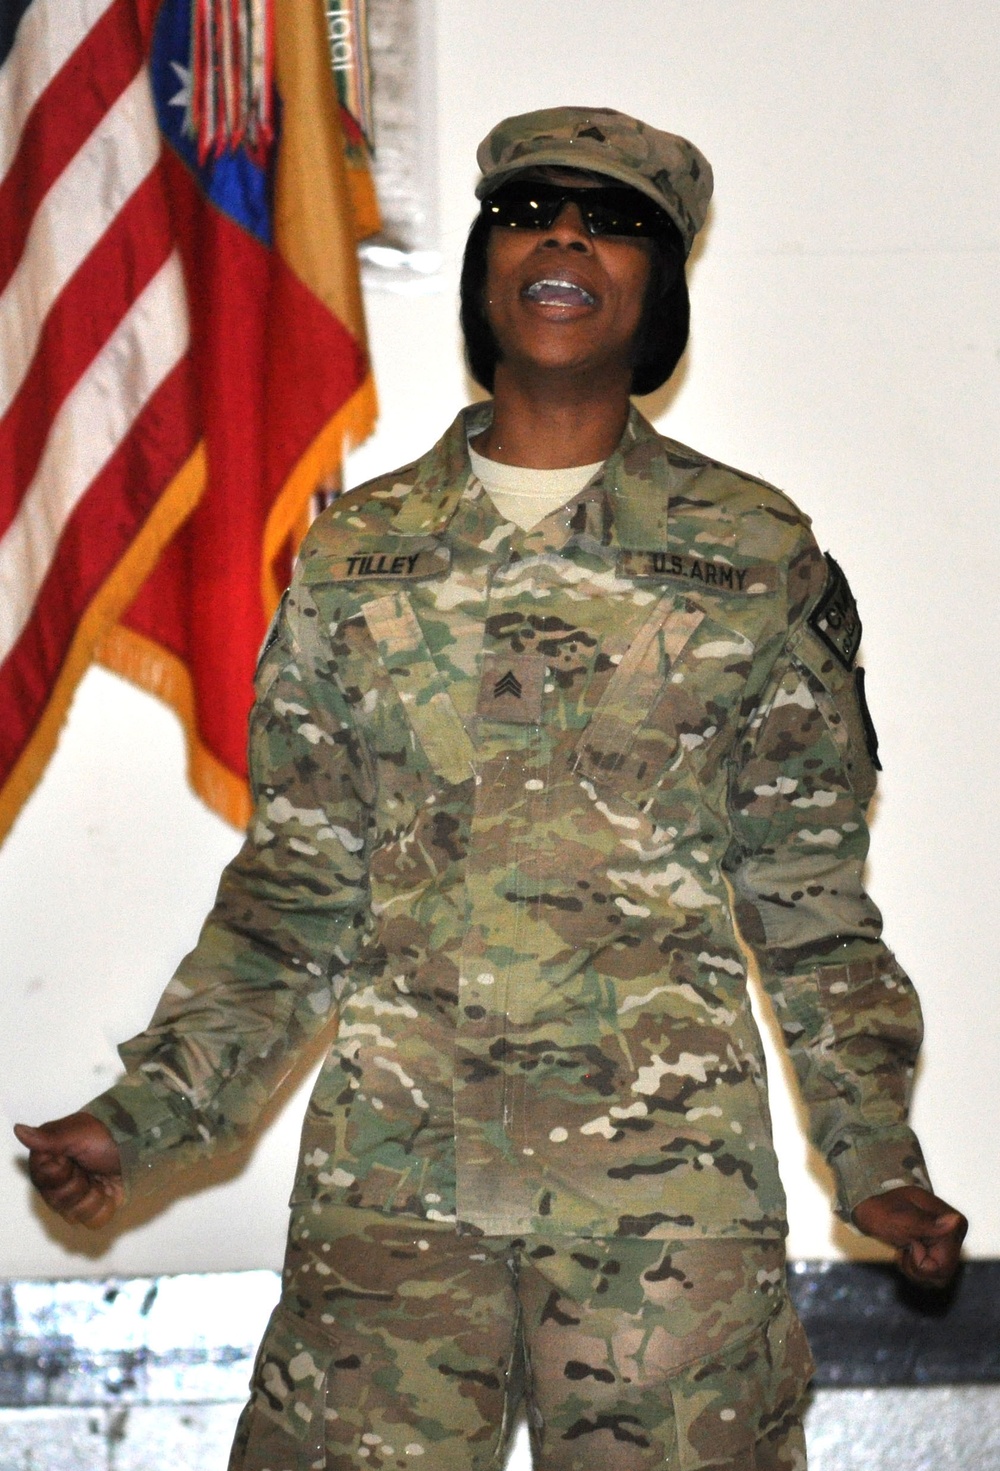 82nd SB-CMRE holds women’s history month presentation in Afghanistan